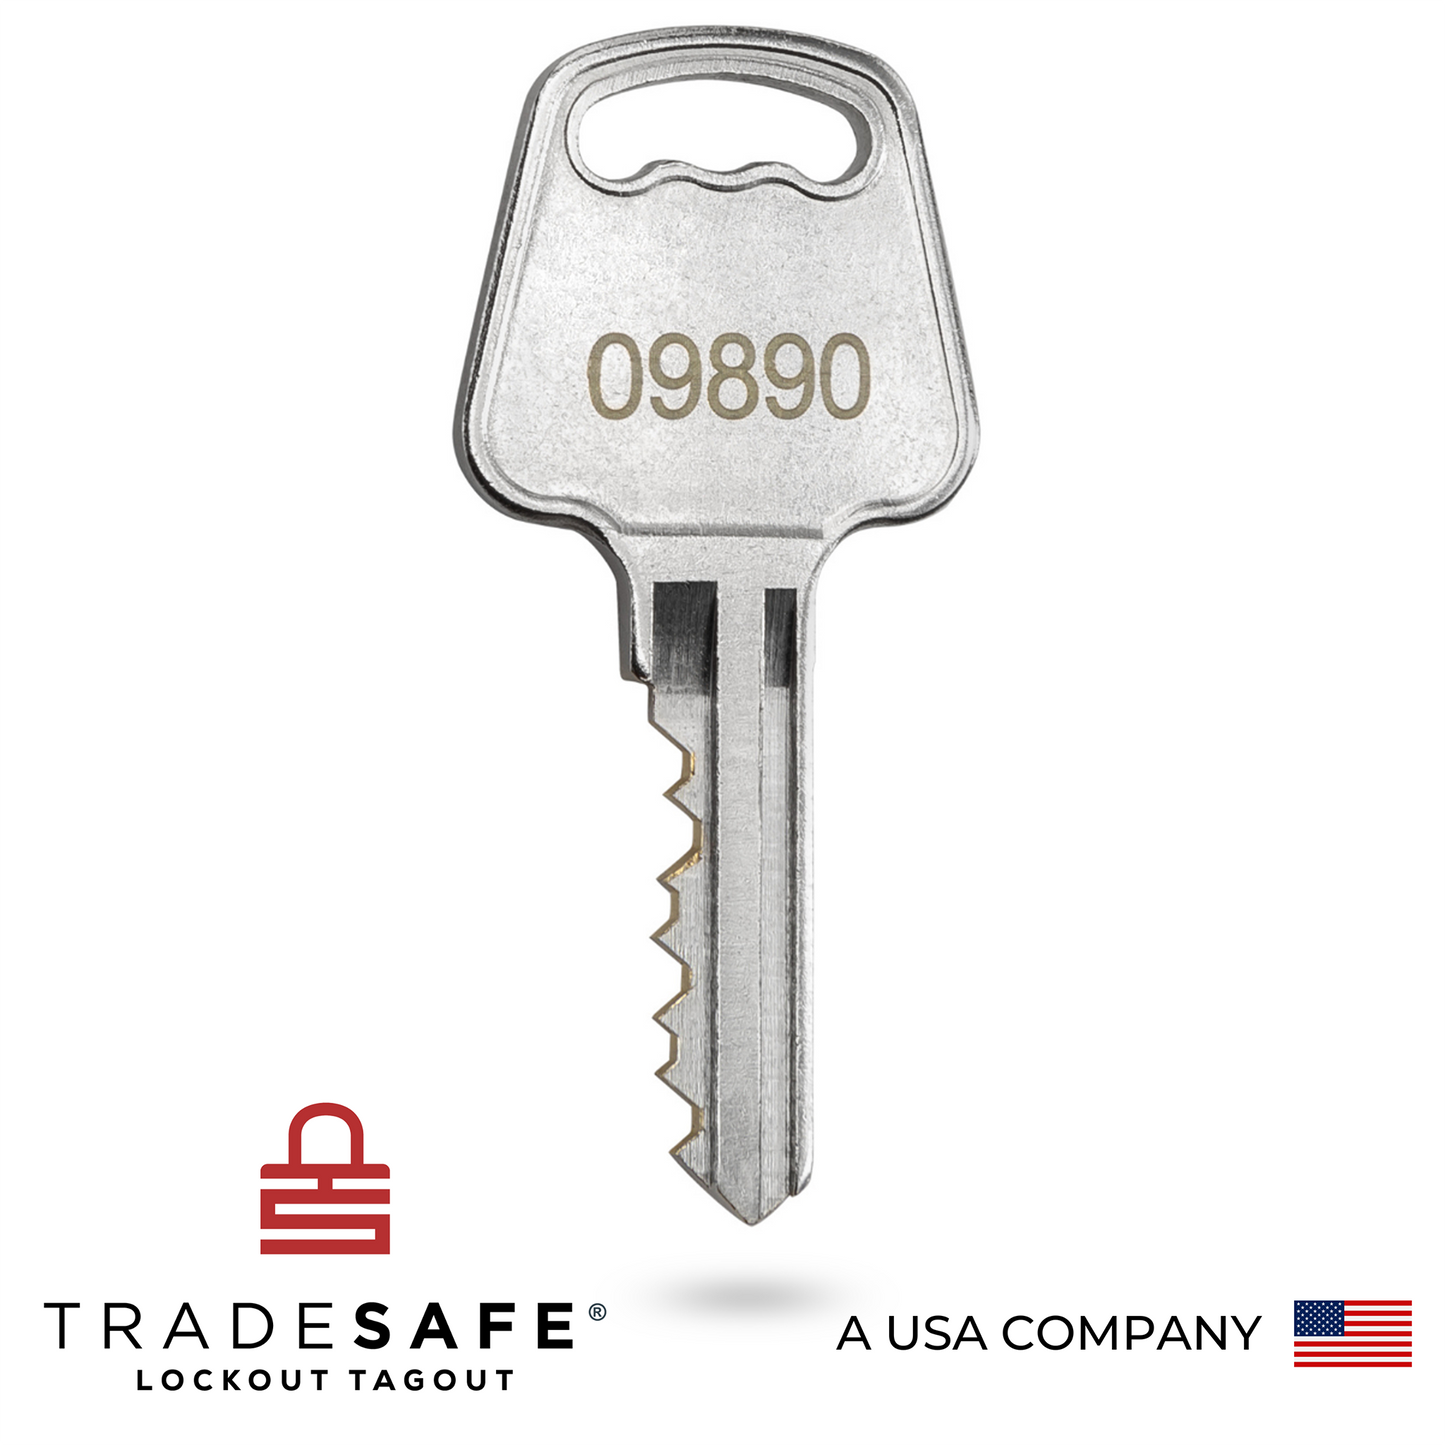 one key with a five-digit code 09890